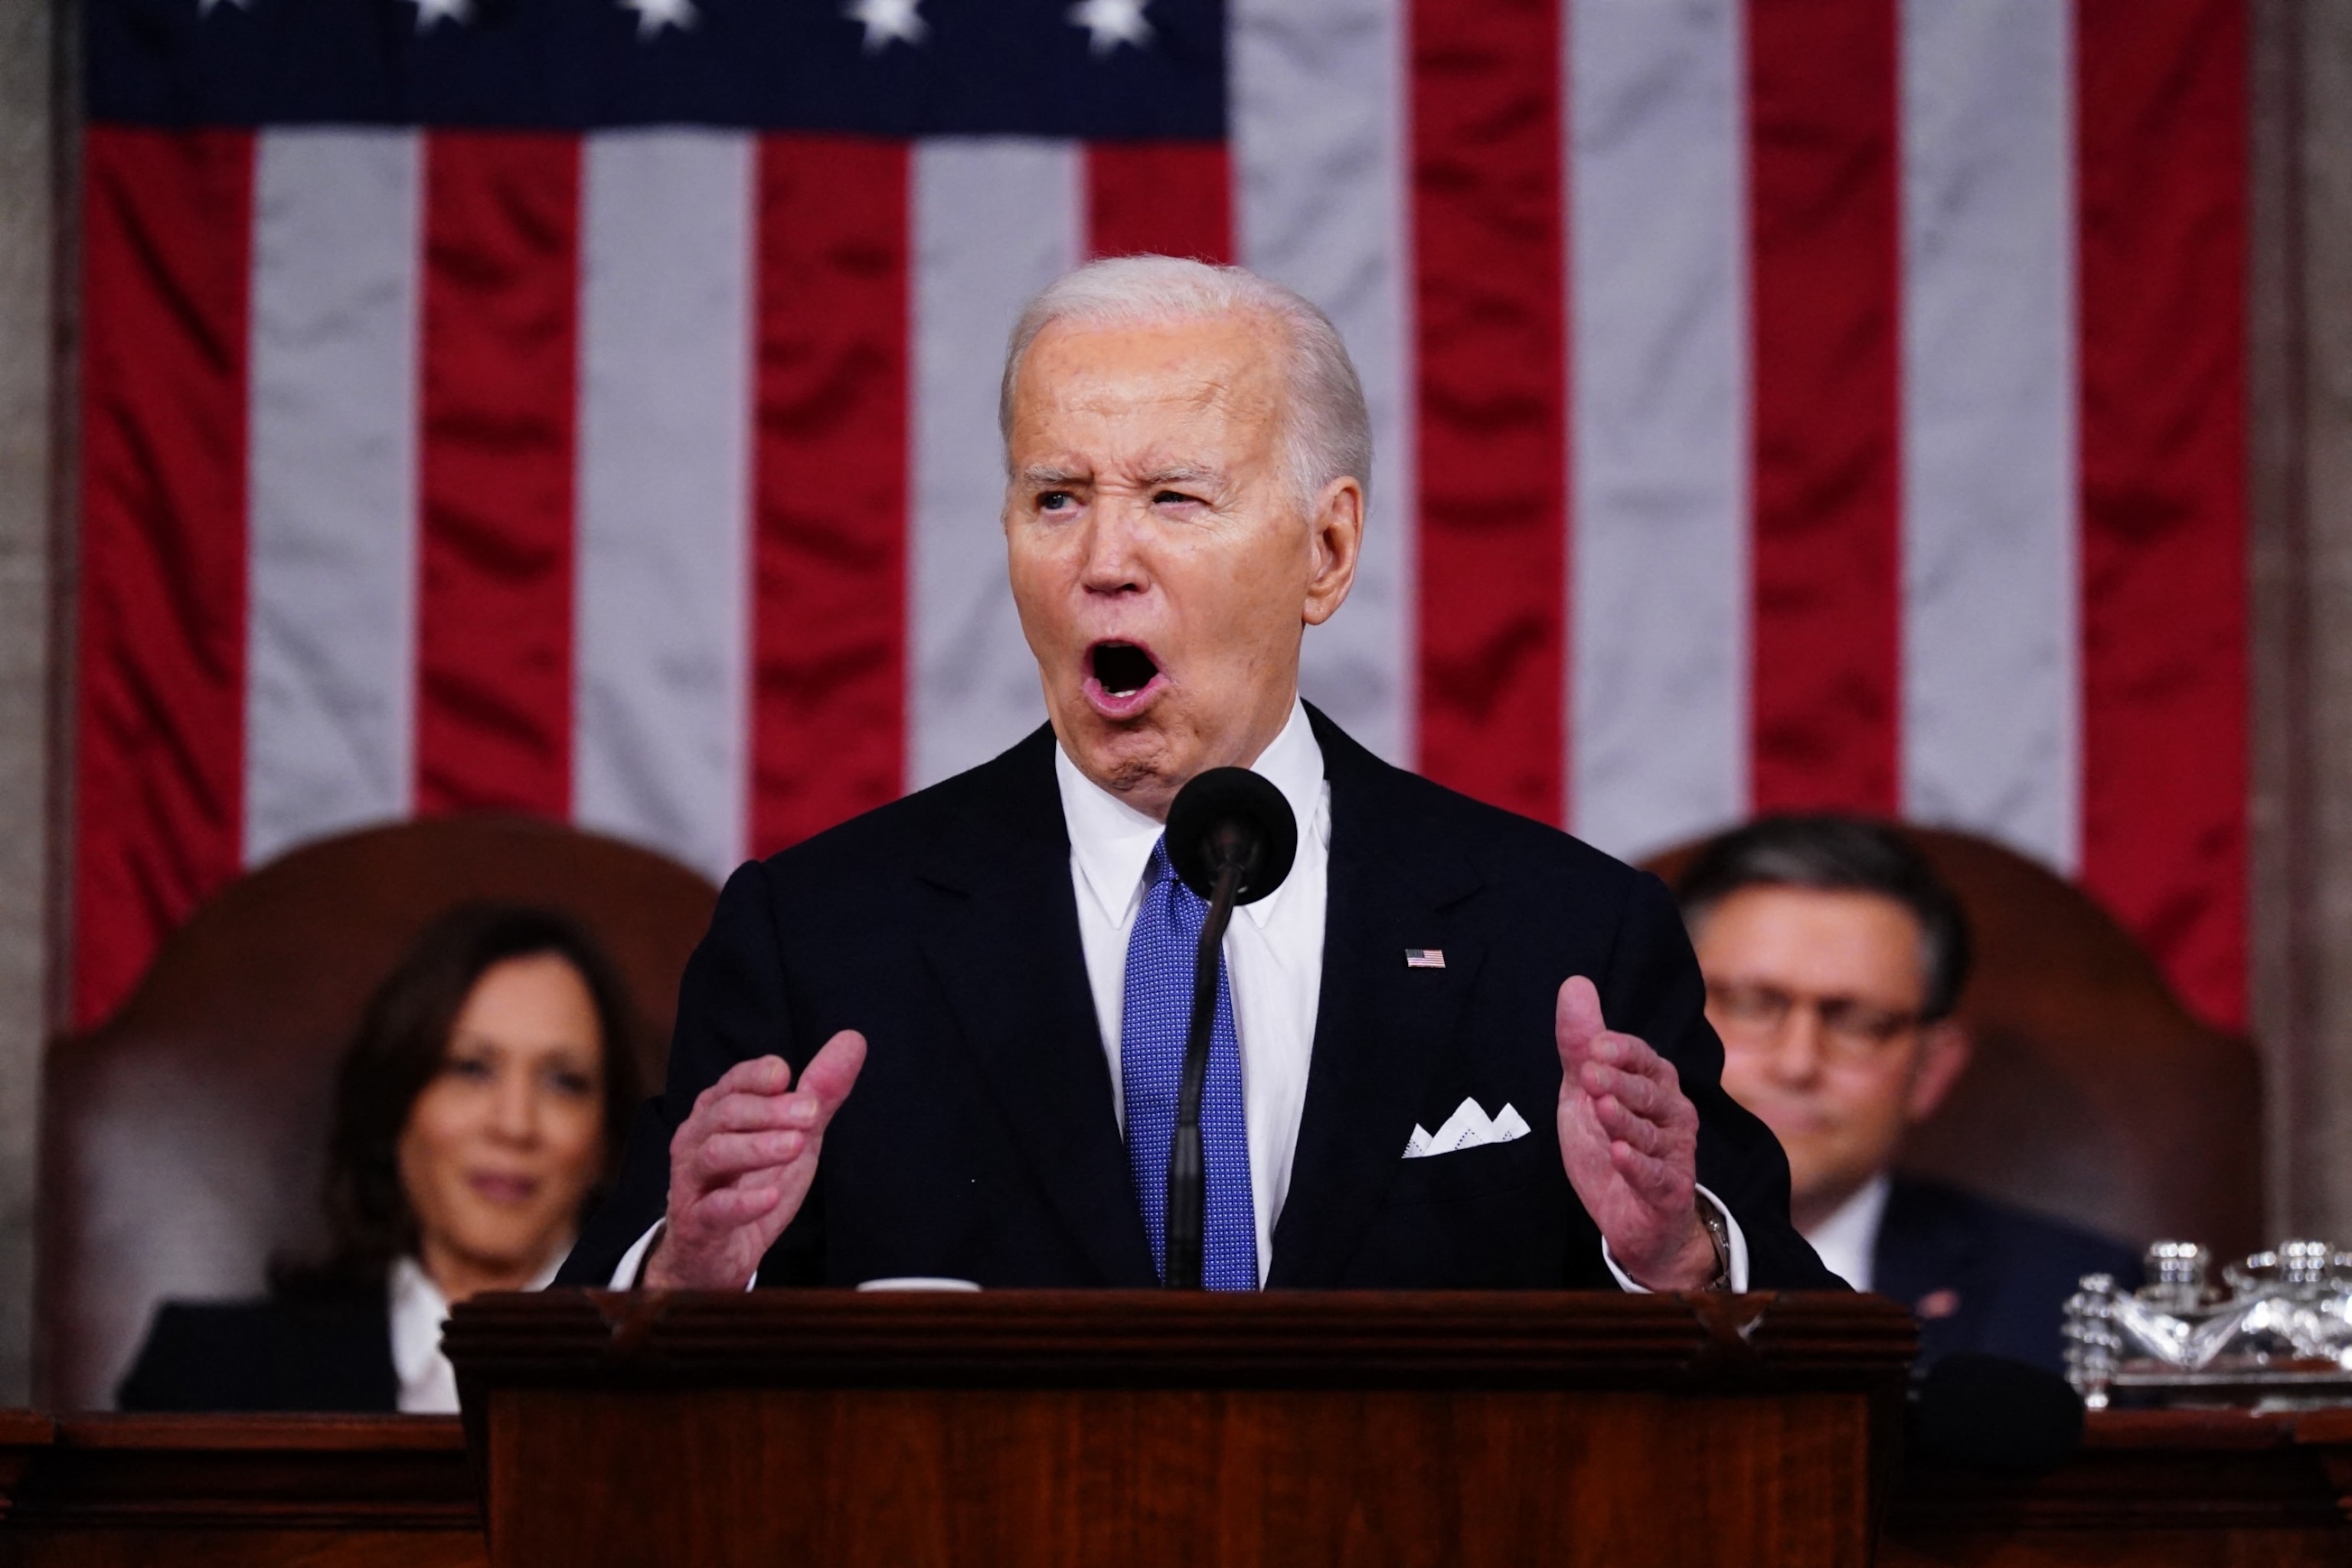 Key proposals from President Biden's State of the Union address - ABC News